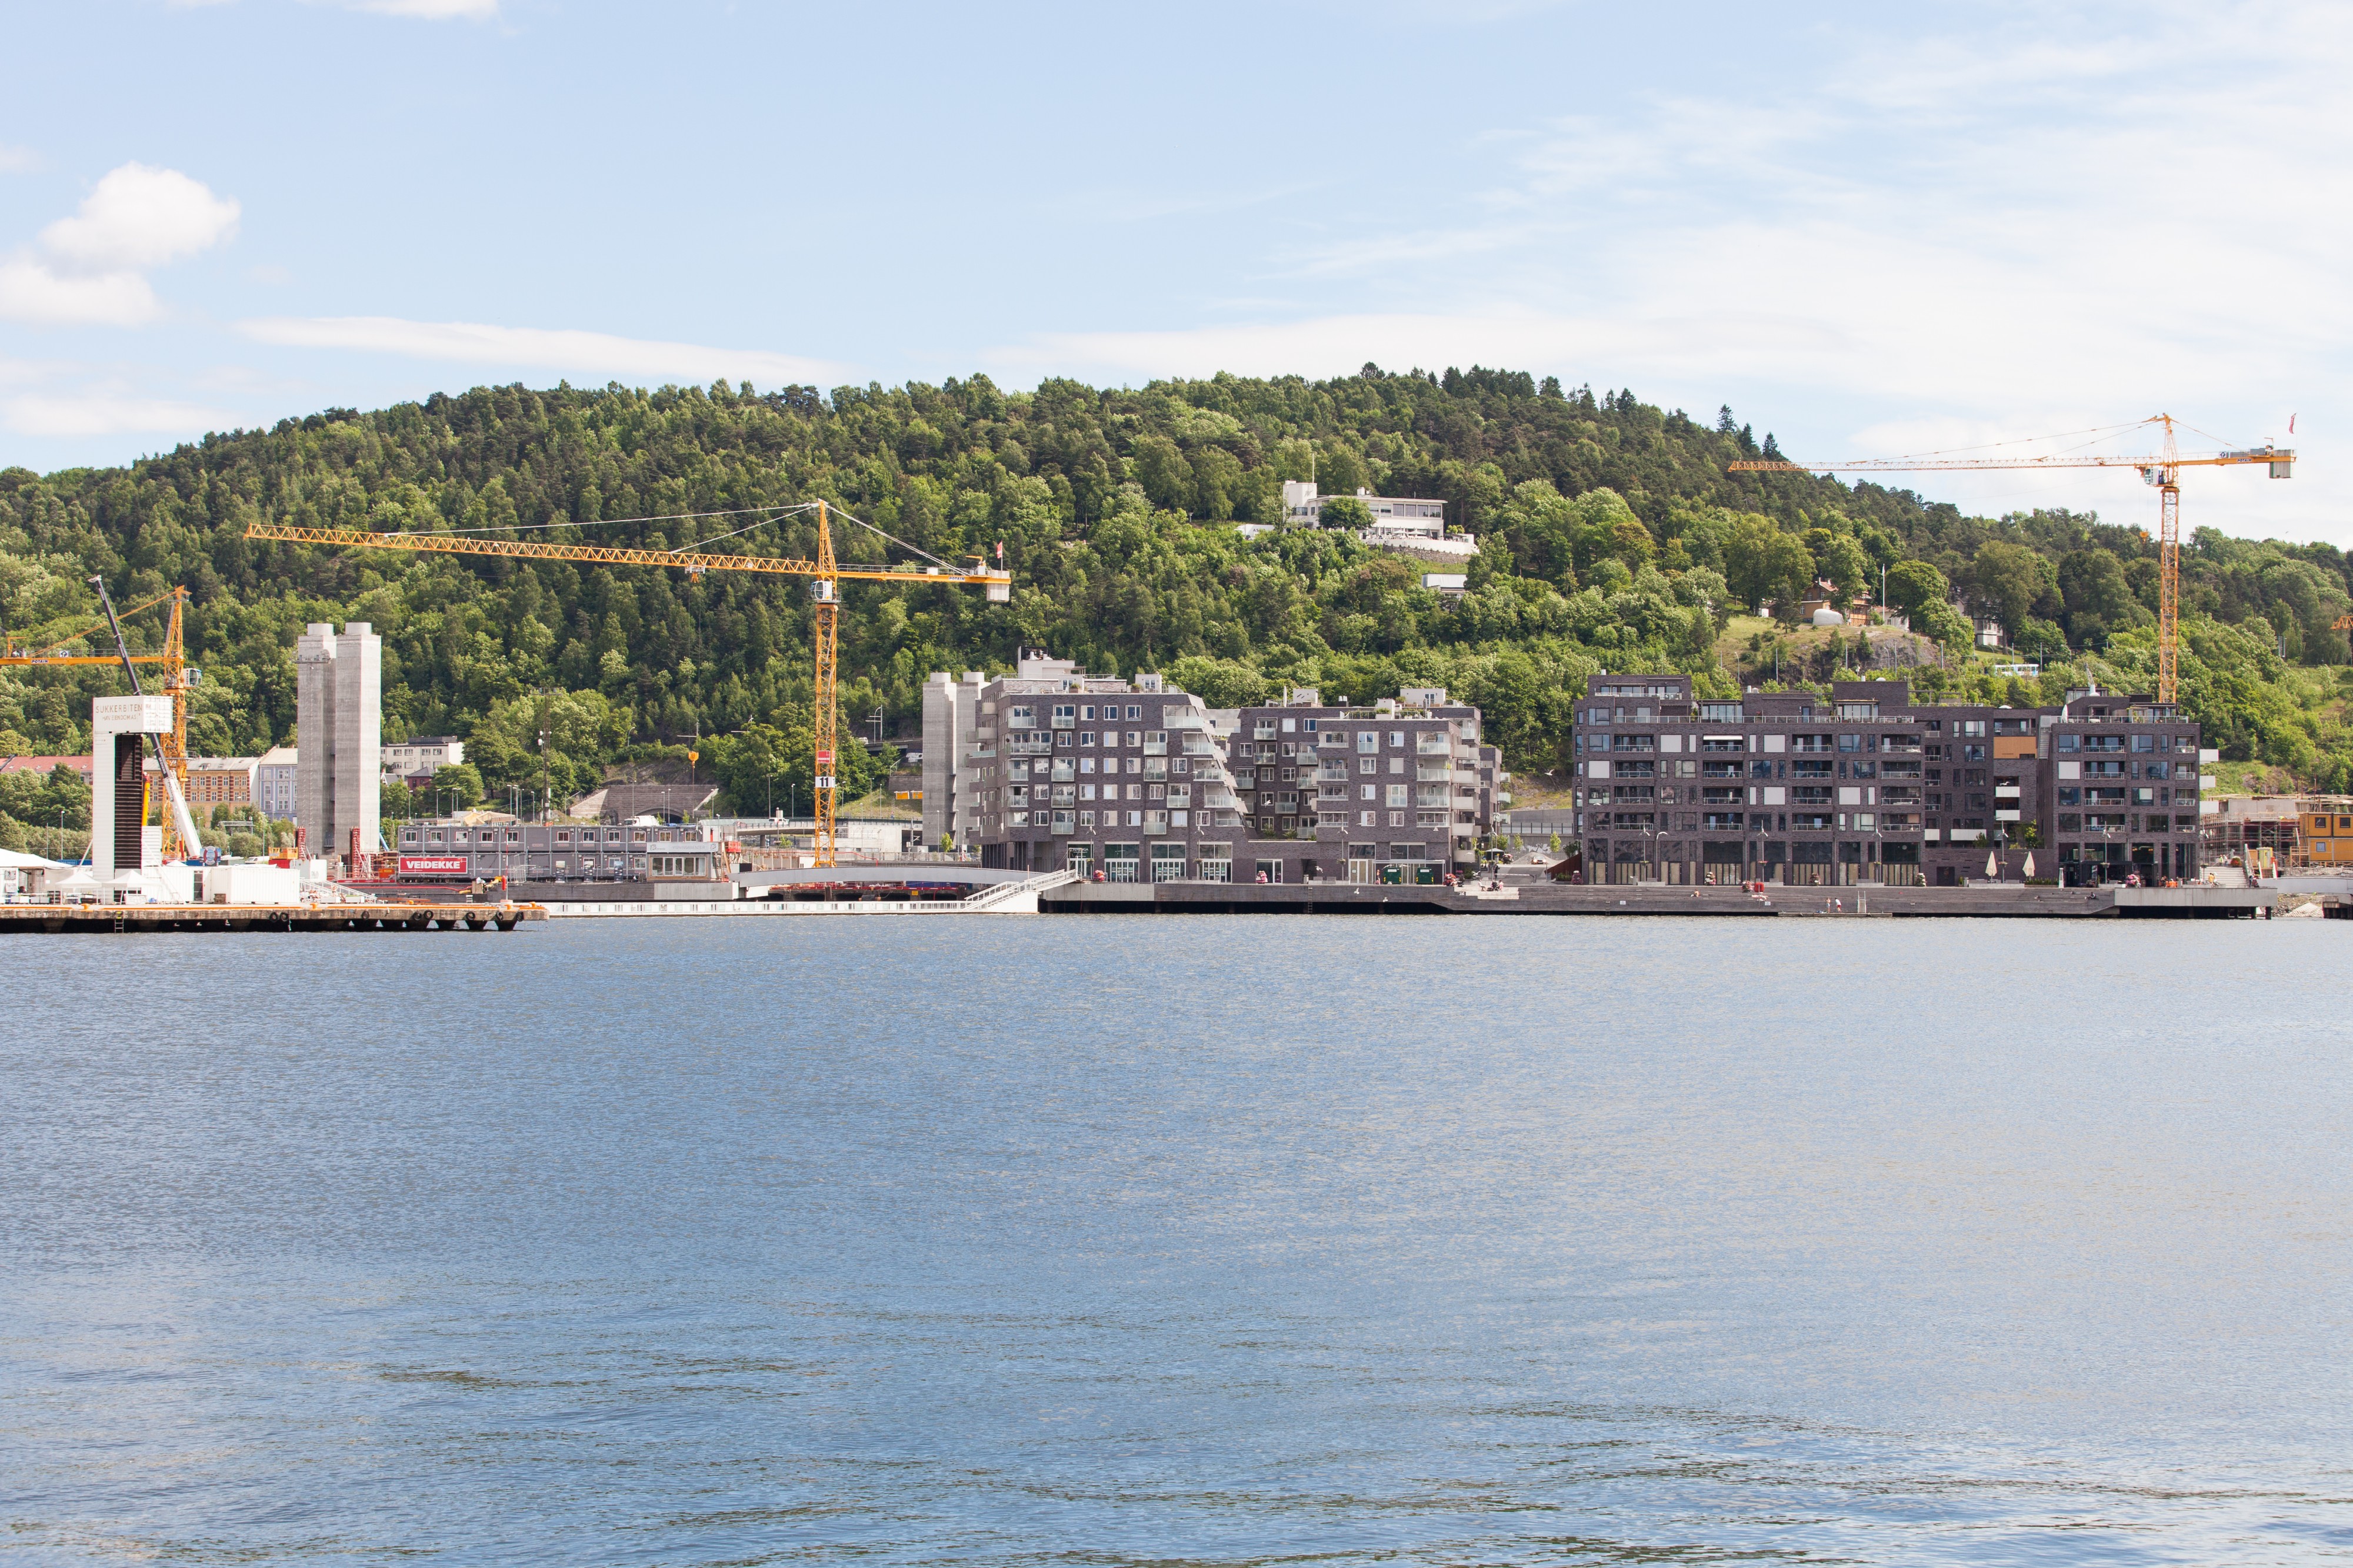 Oslo city, Norway, June 2014, picture 8